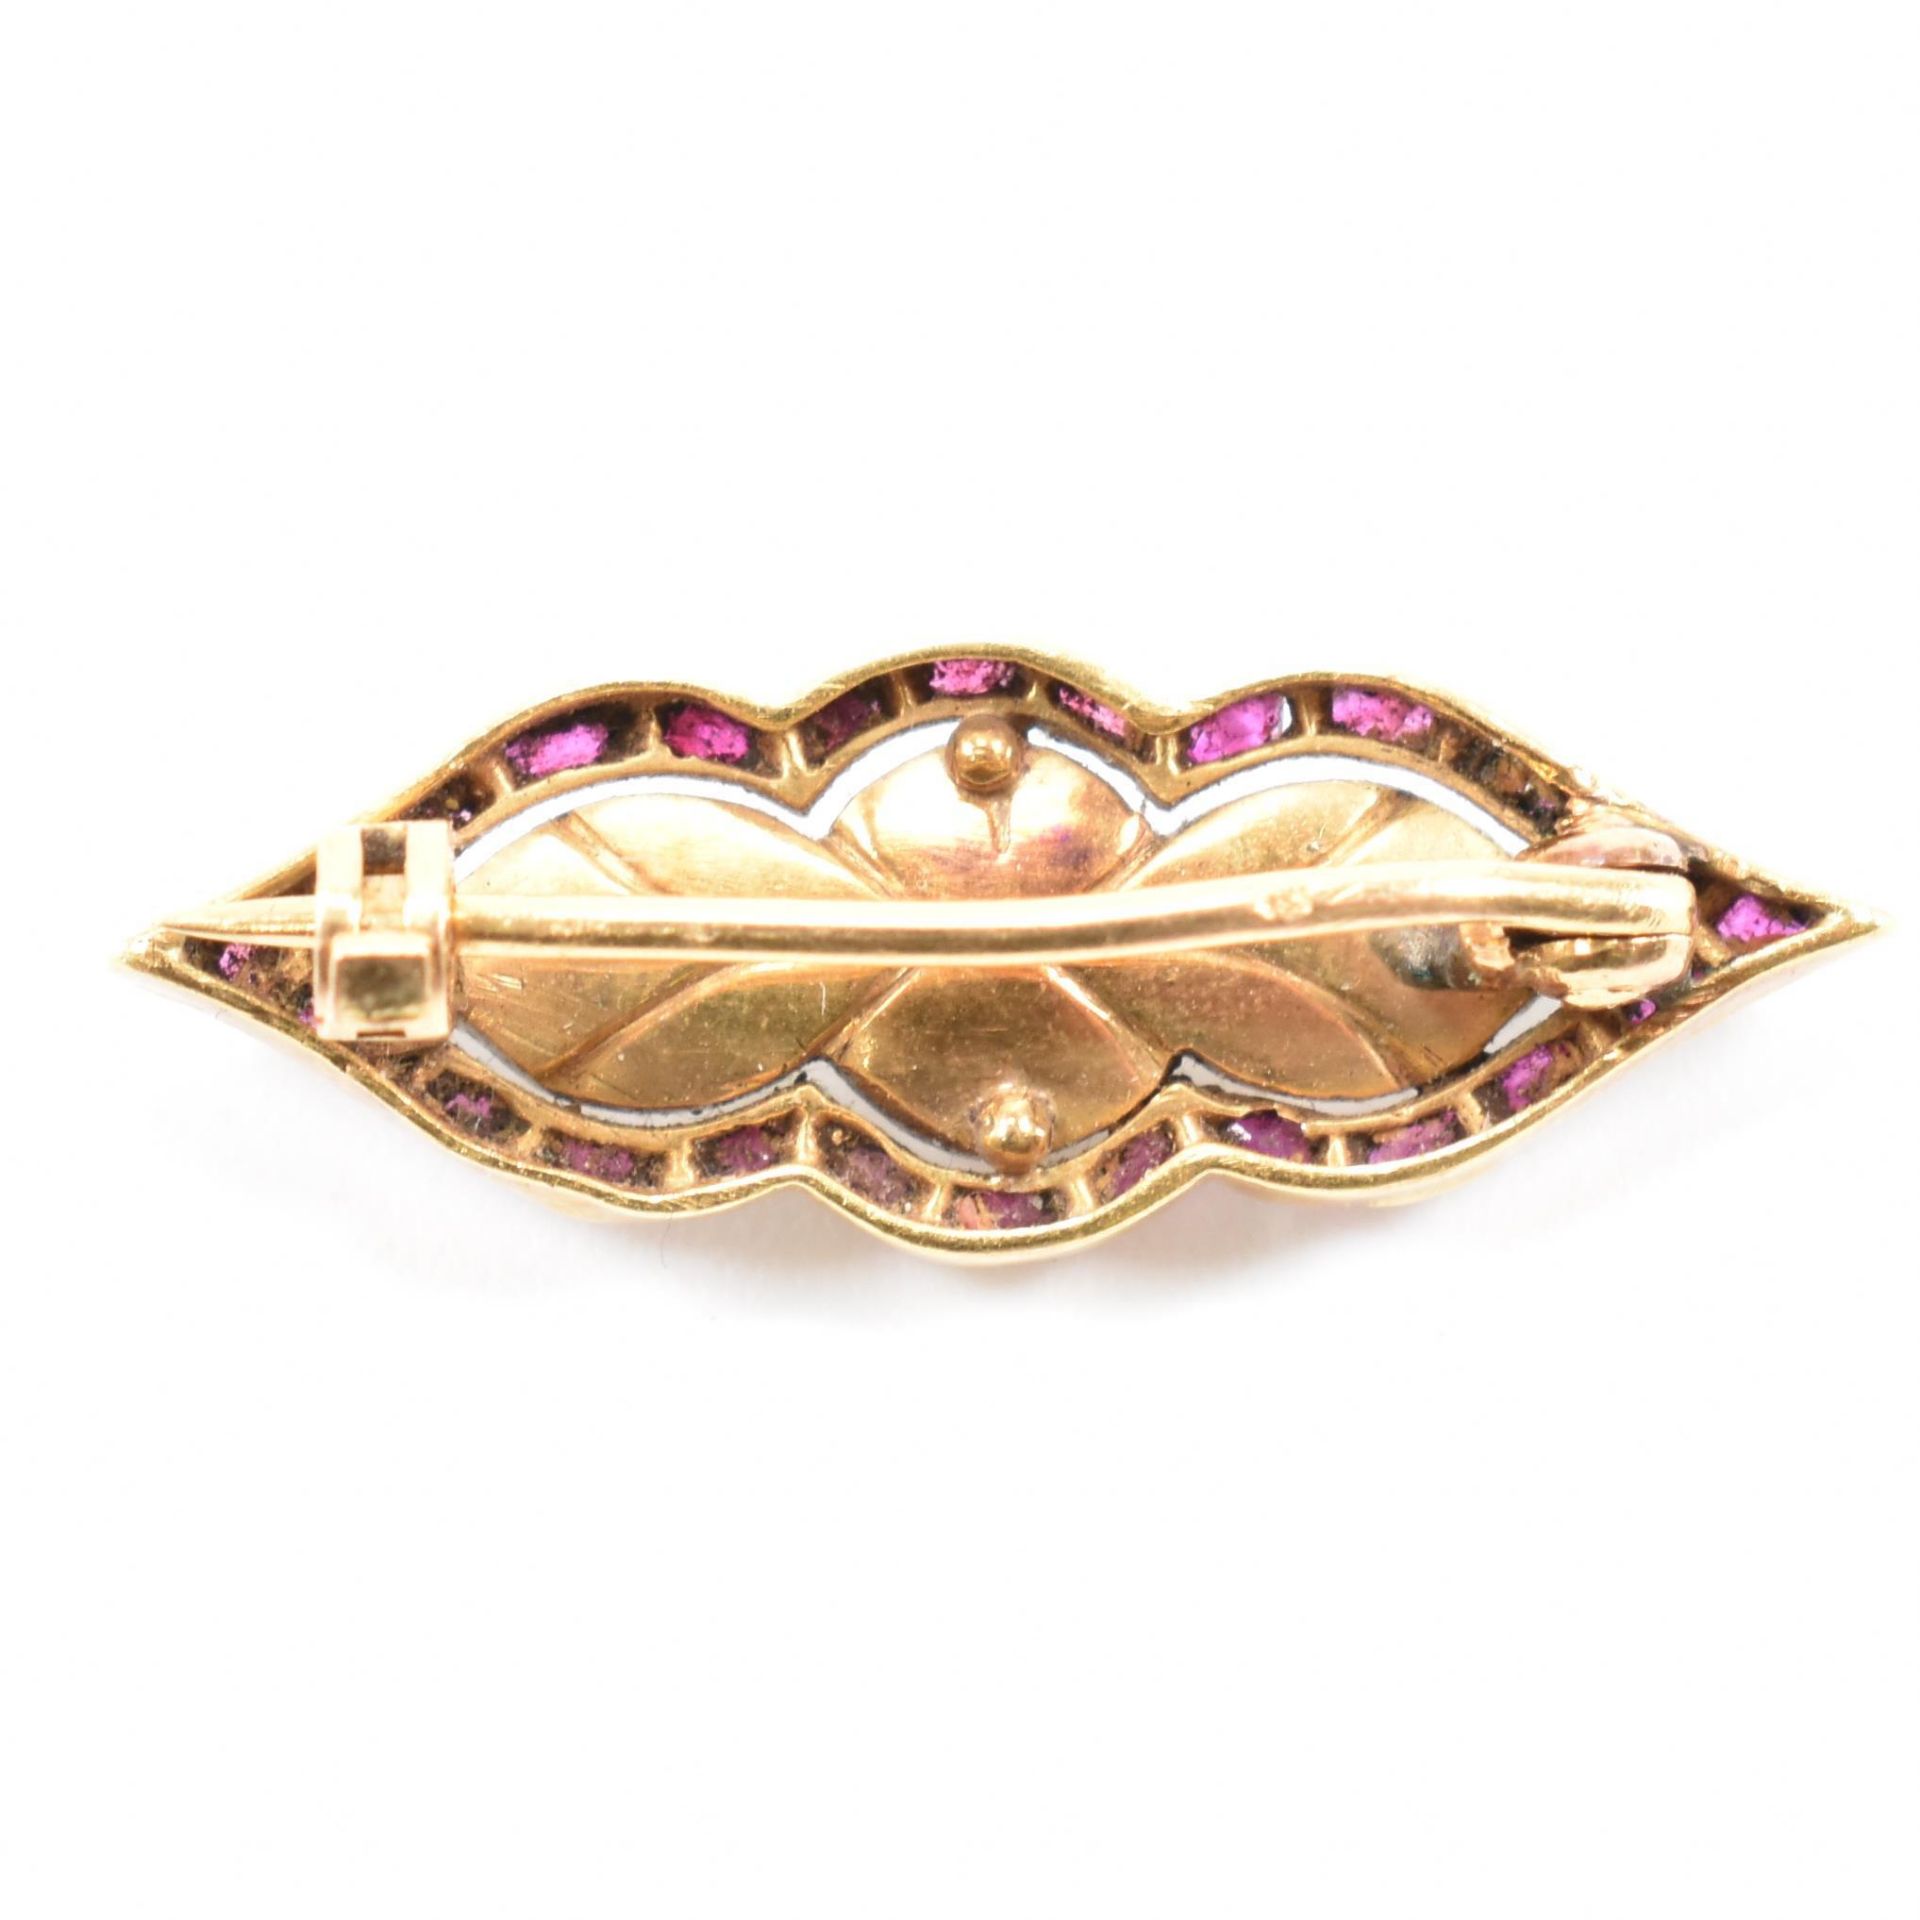 19TH CENTURY FRENCH RUBY & DIAMOND BROOCH PIN - Image 2 of 6